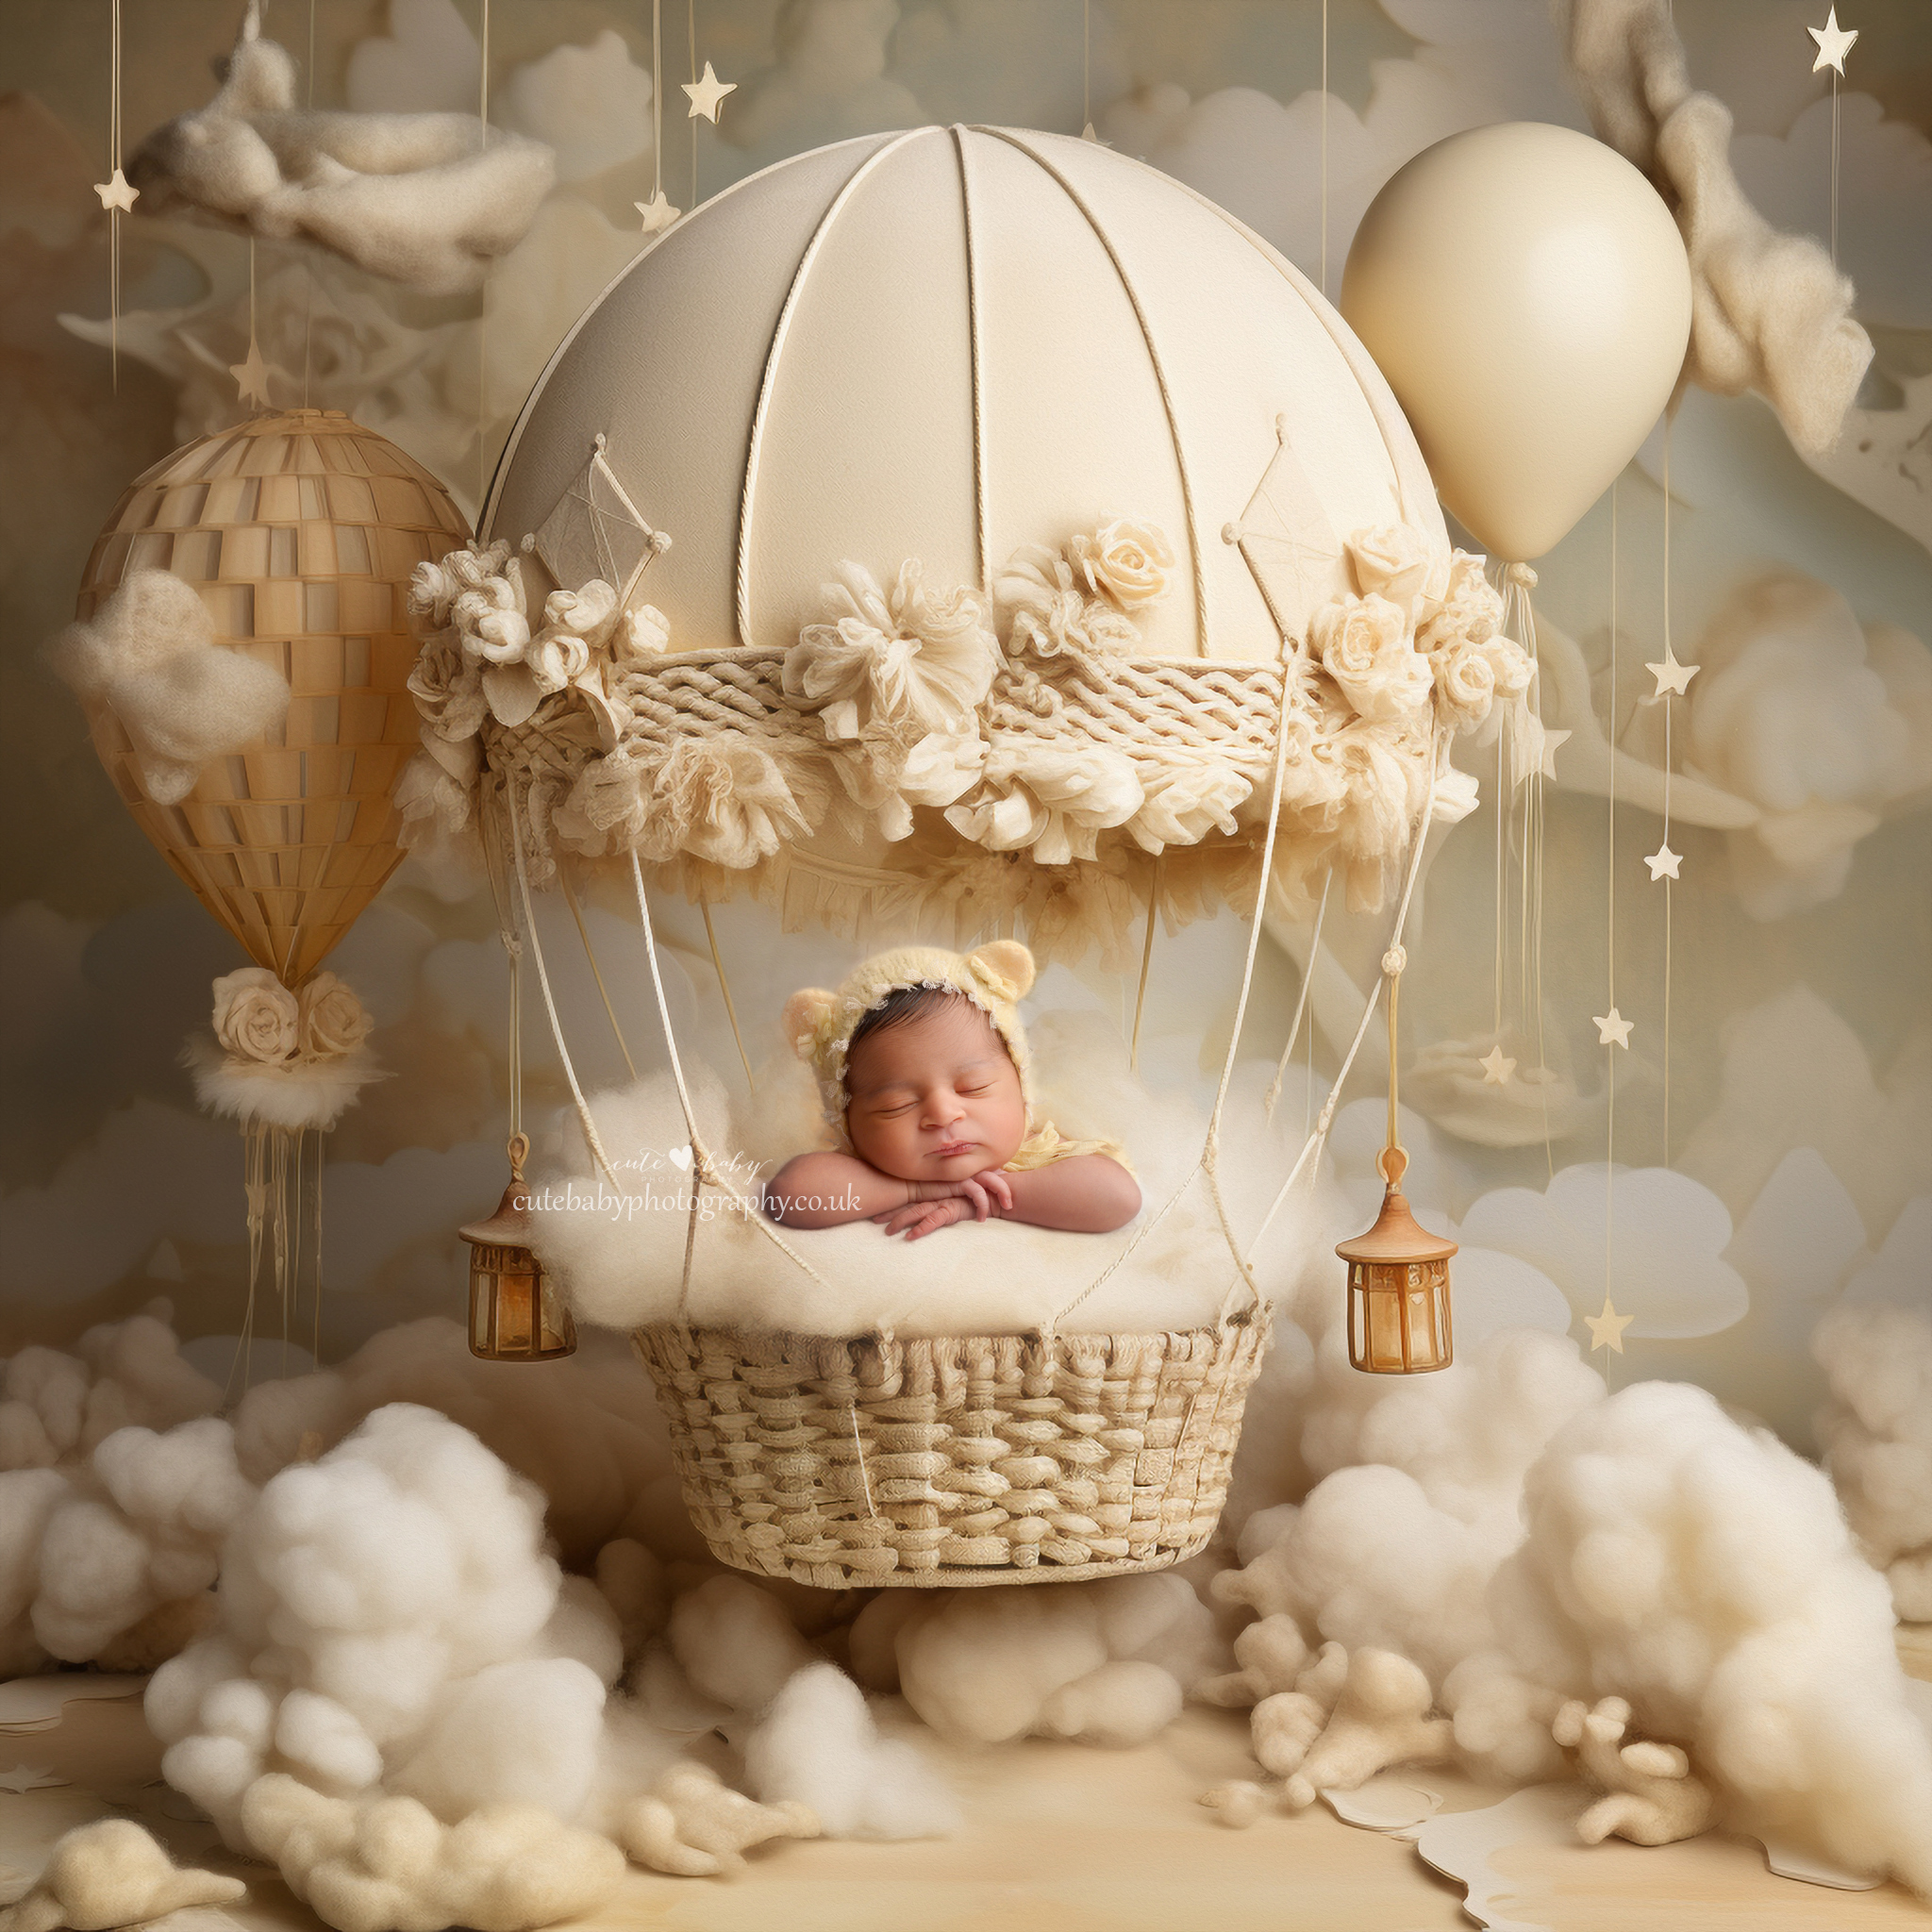 cute baby photography, baby photography Manchester, cute baby photography Manchester, Manchester newborn photography, newborn photography, cute baby Manchester, newborn session, newborn session Manchester